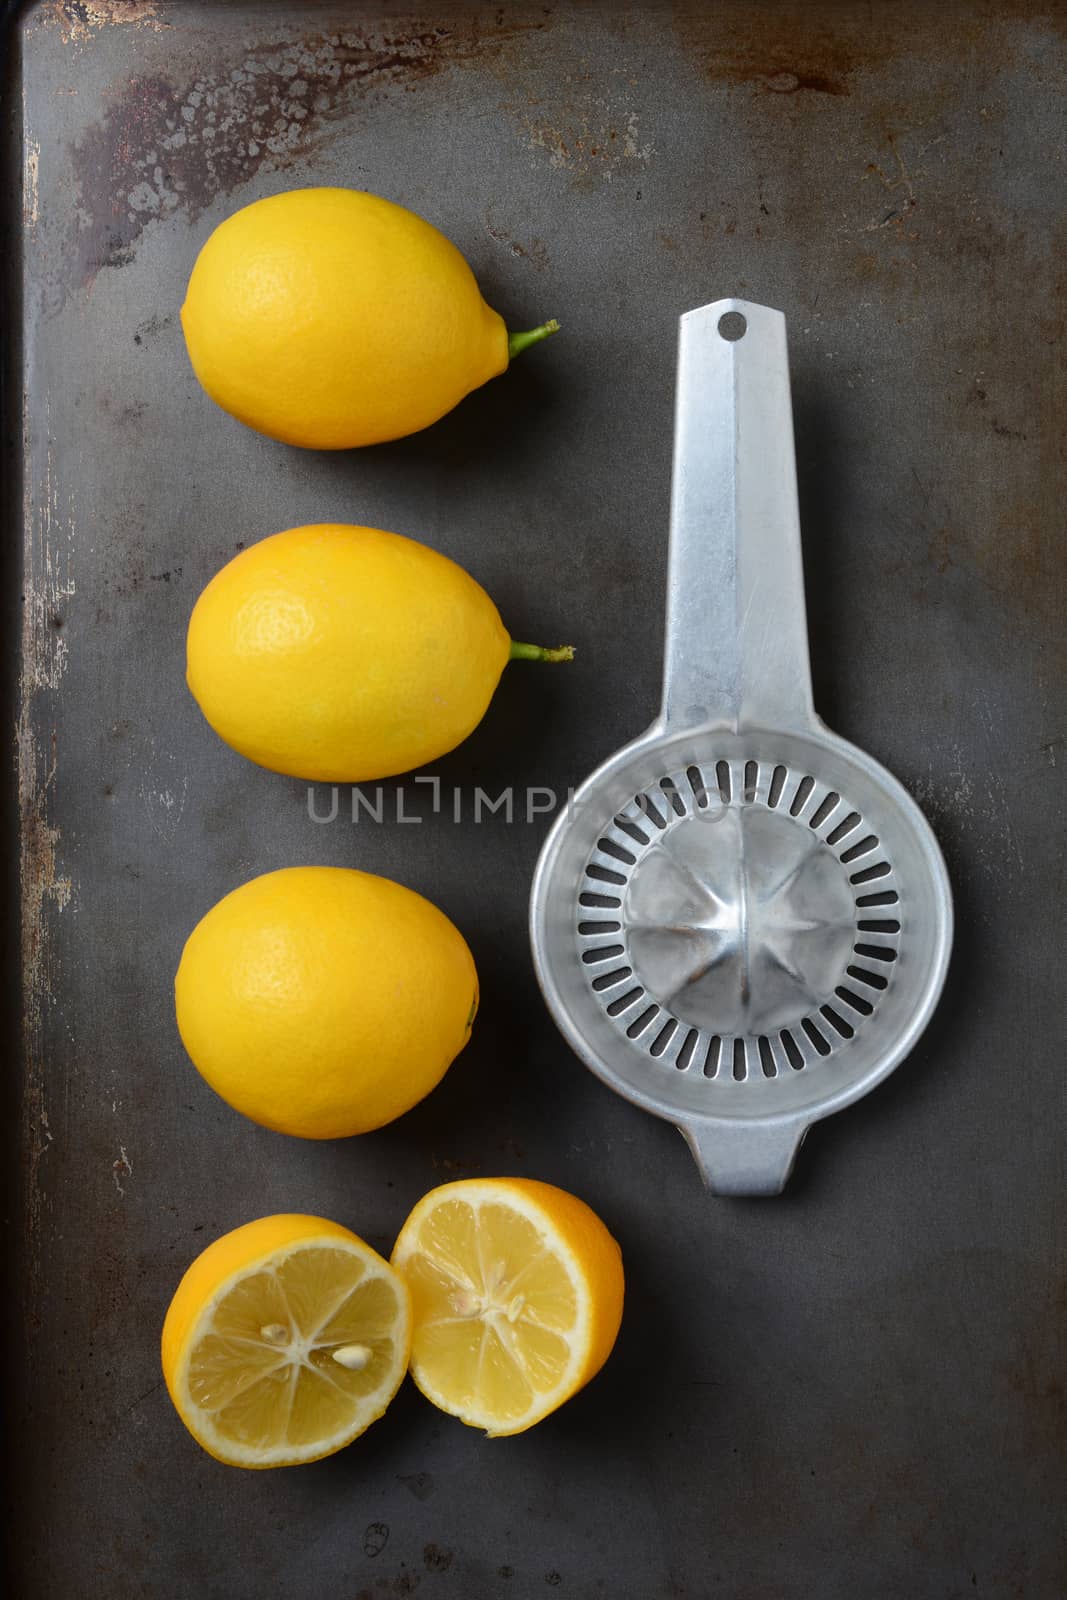 High angle shot of a group of lemons, three whole and one cut, on a metal baking sheet with an old fashioned juicer. Horizontal format.